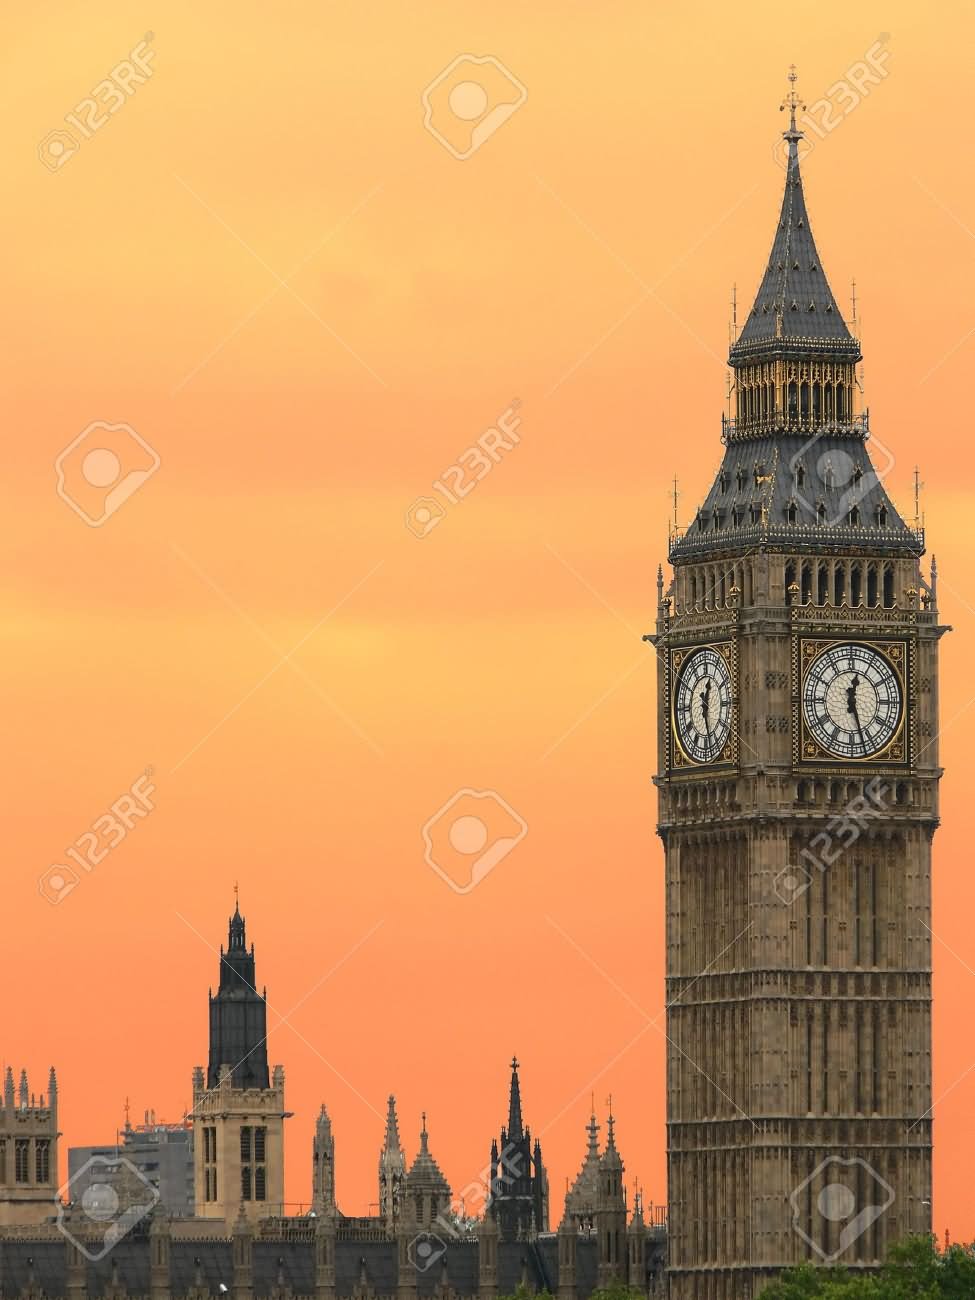 Big Ben During Sunset Picture